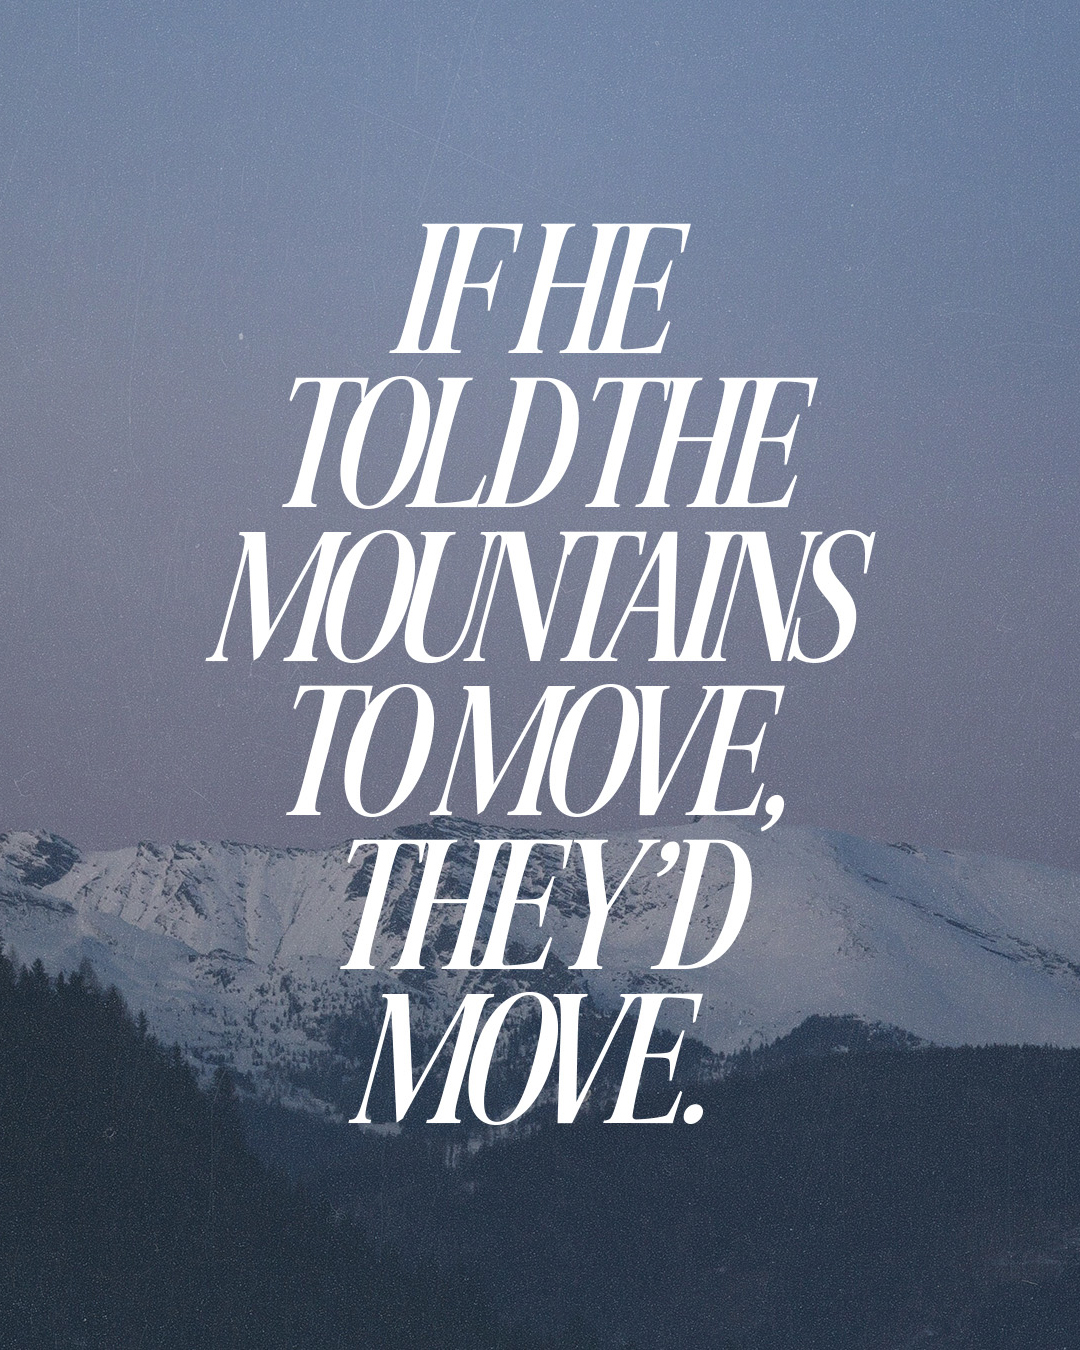 If he told the mountains to move, they’d move